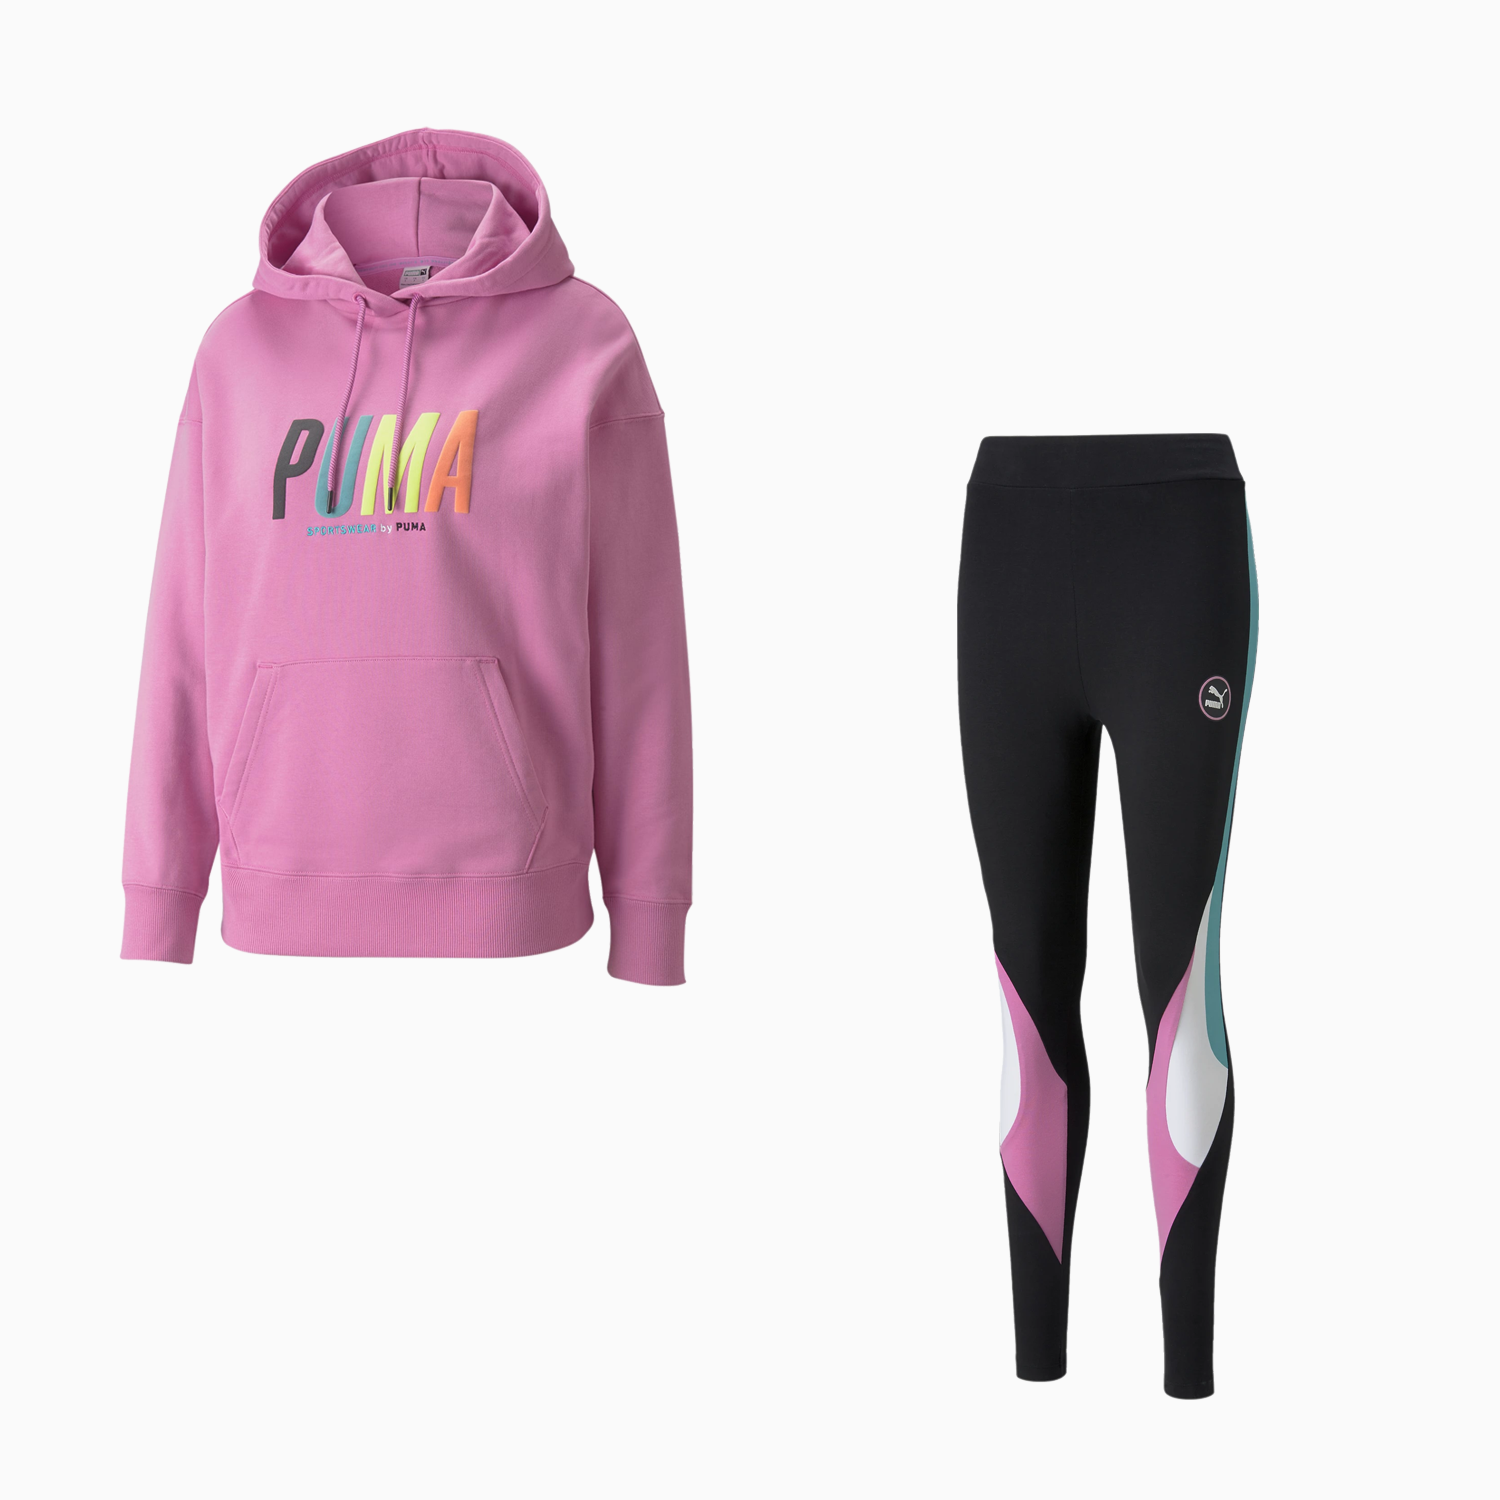 puma-womens-sportswear-graphic-outfit-536015-15-670470-01